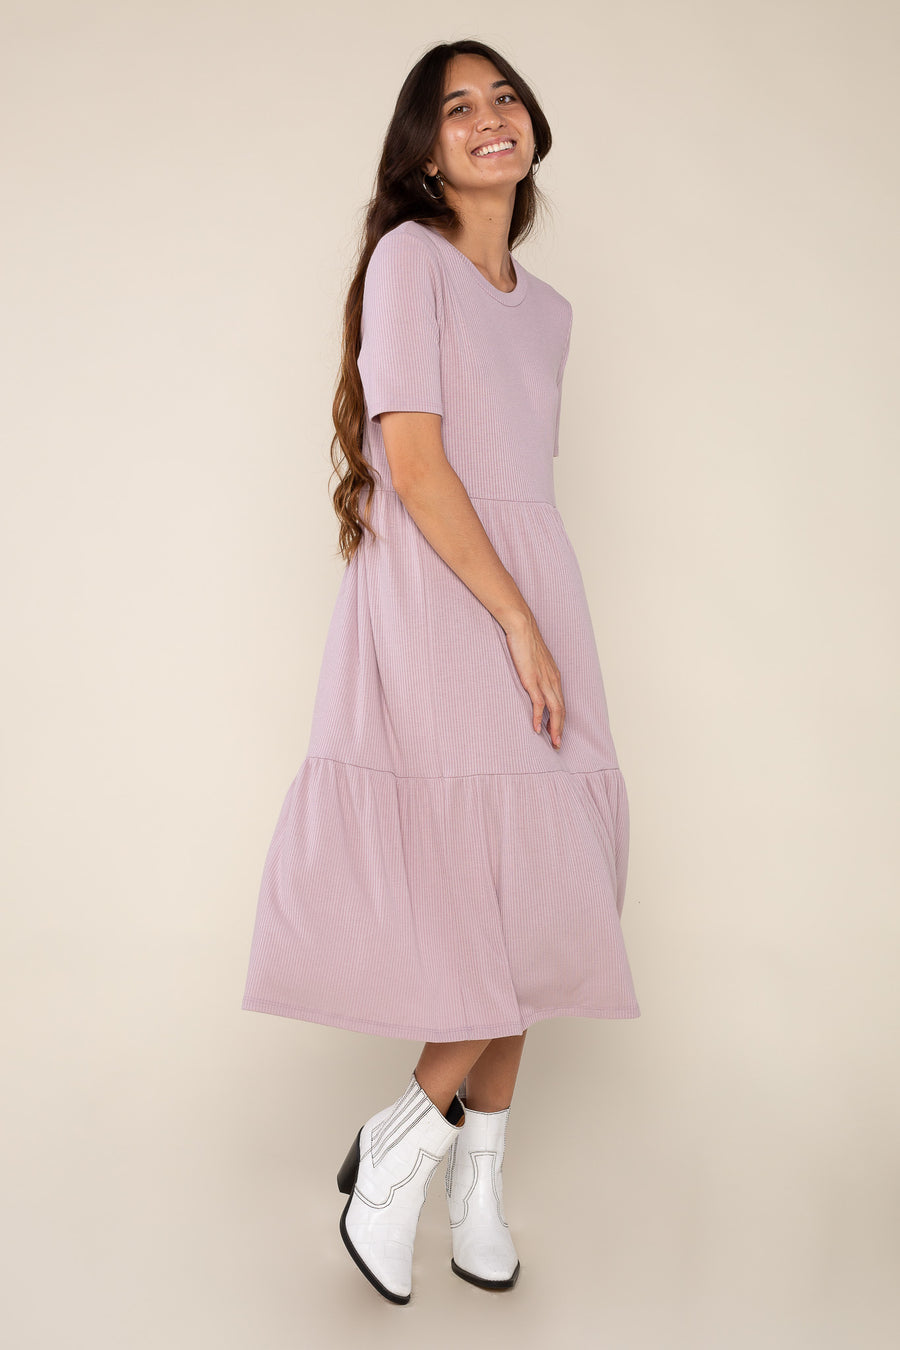 Clementine Dress in Lilac (Final Sale)